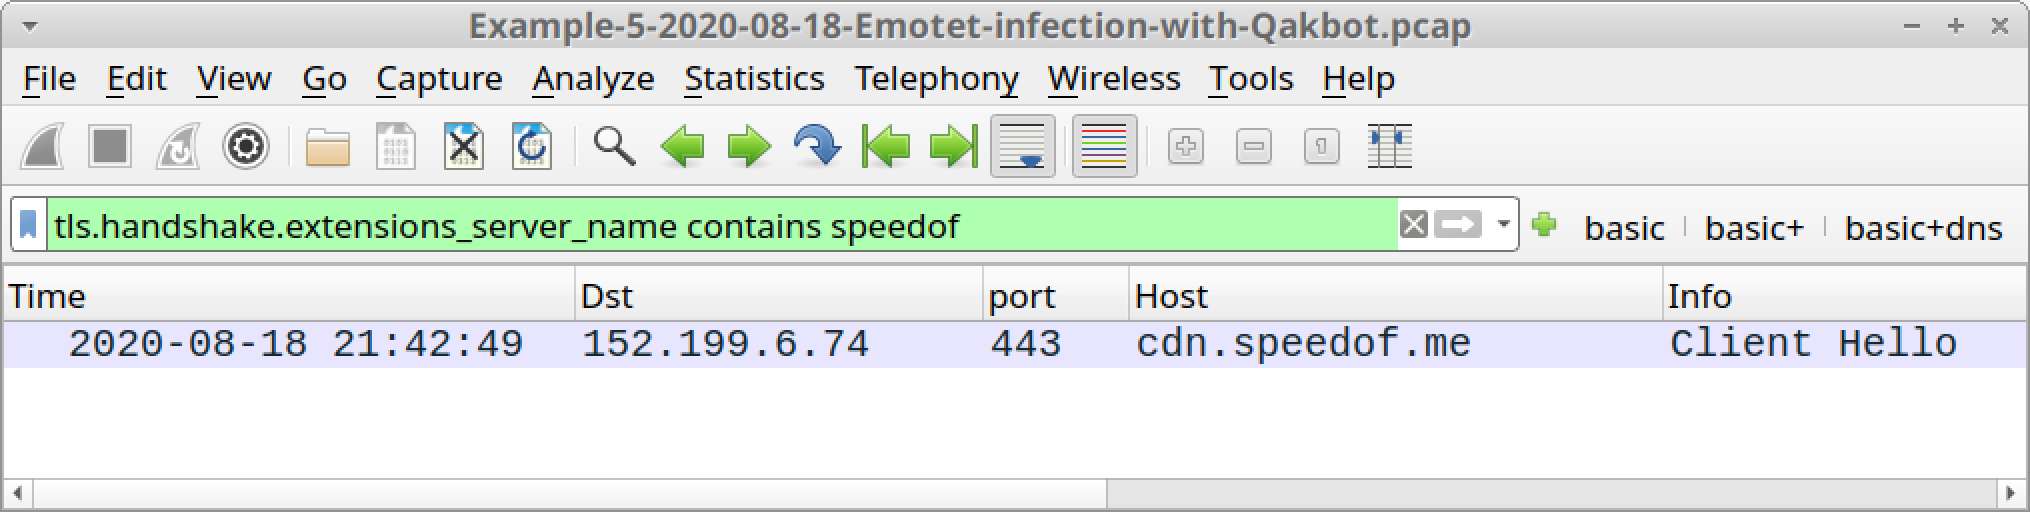 Figure 34. Filtering for traffic to cdn.speedof[.]me, which is not inherently malicious, but a connectivity check caused by Qakbot prior to late November 2020.